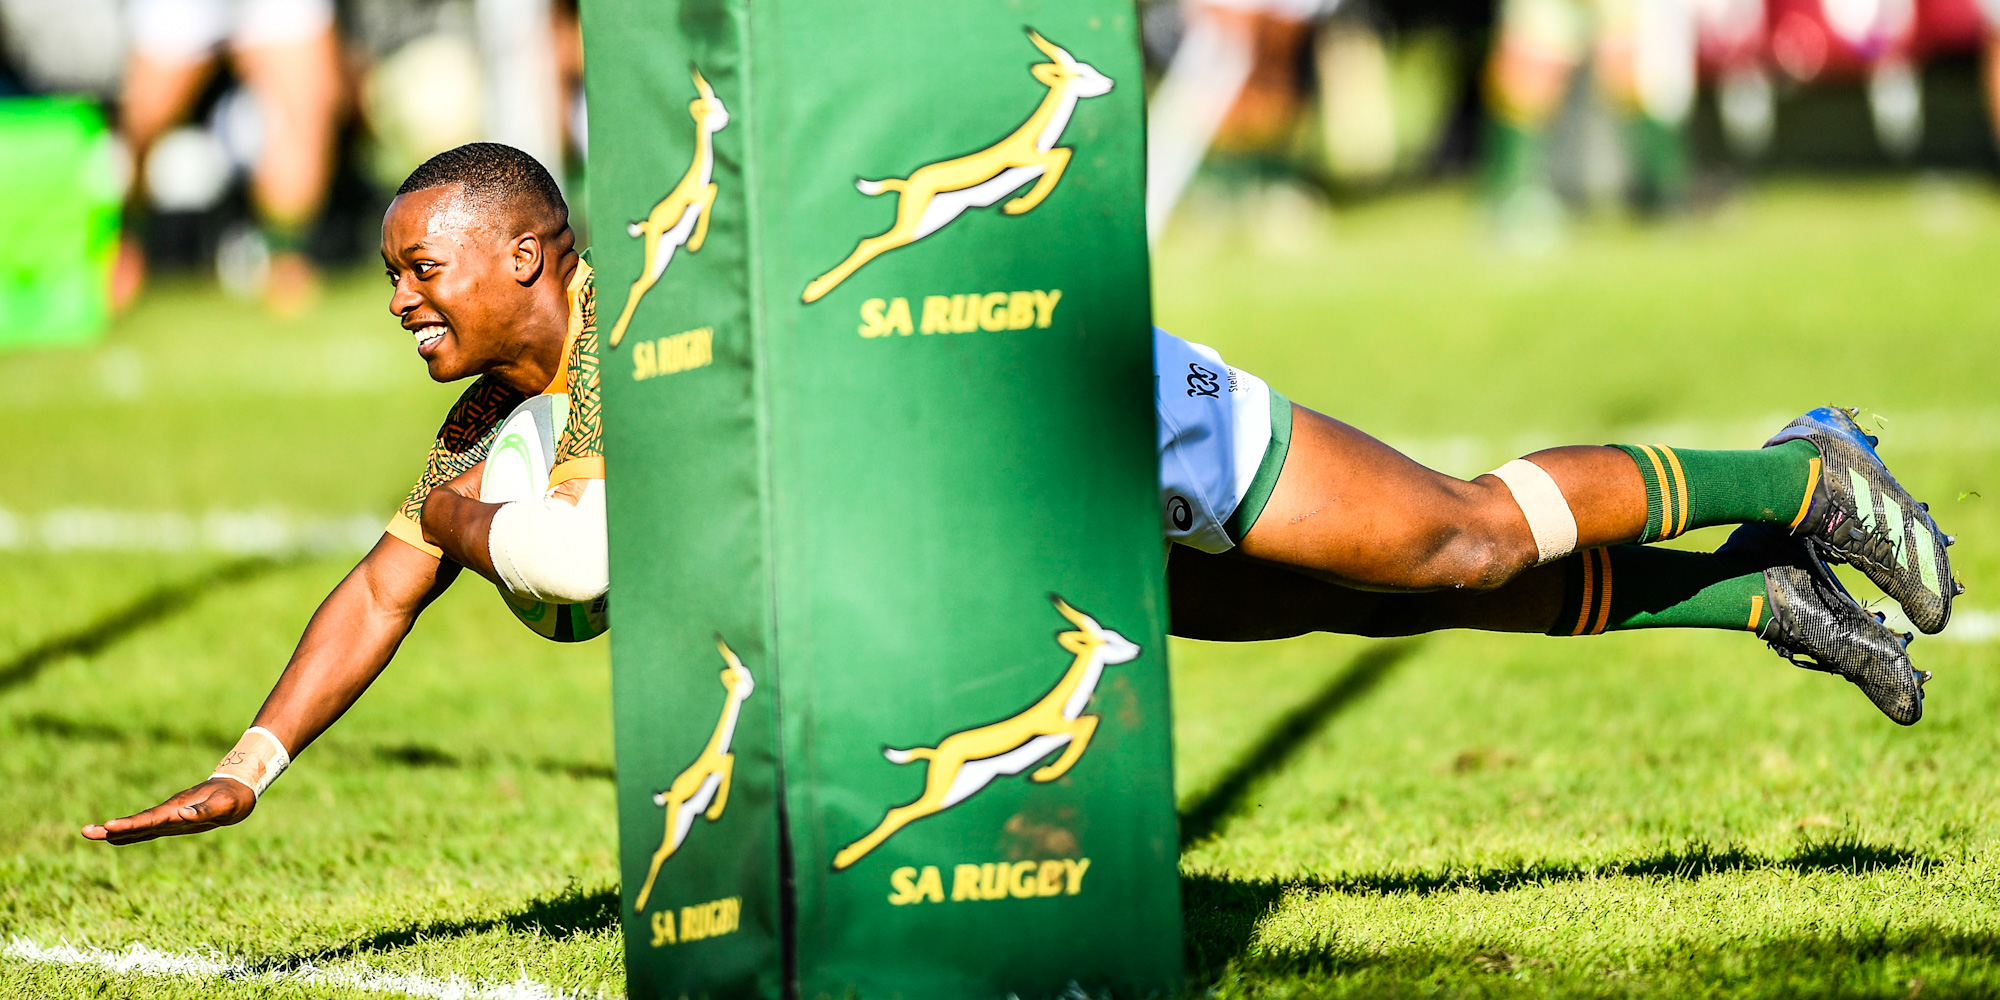 Litelihle Bester goes over for his first try.